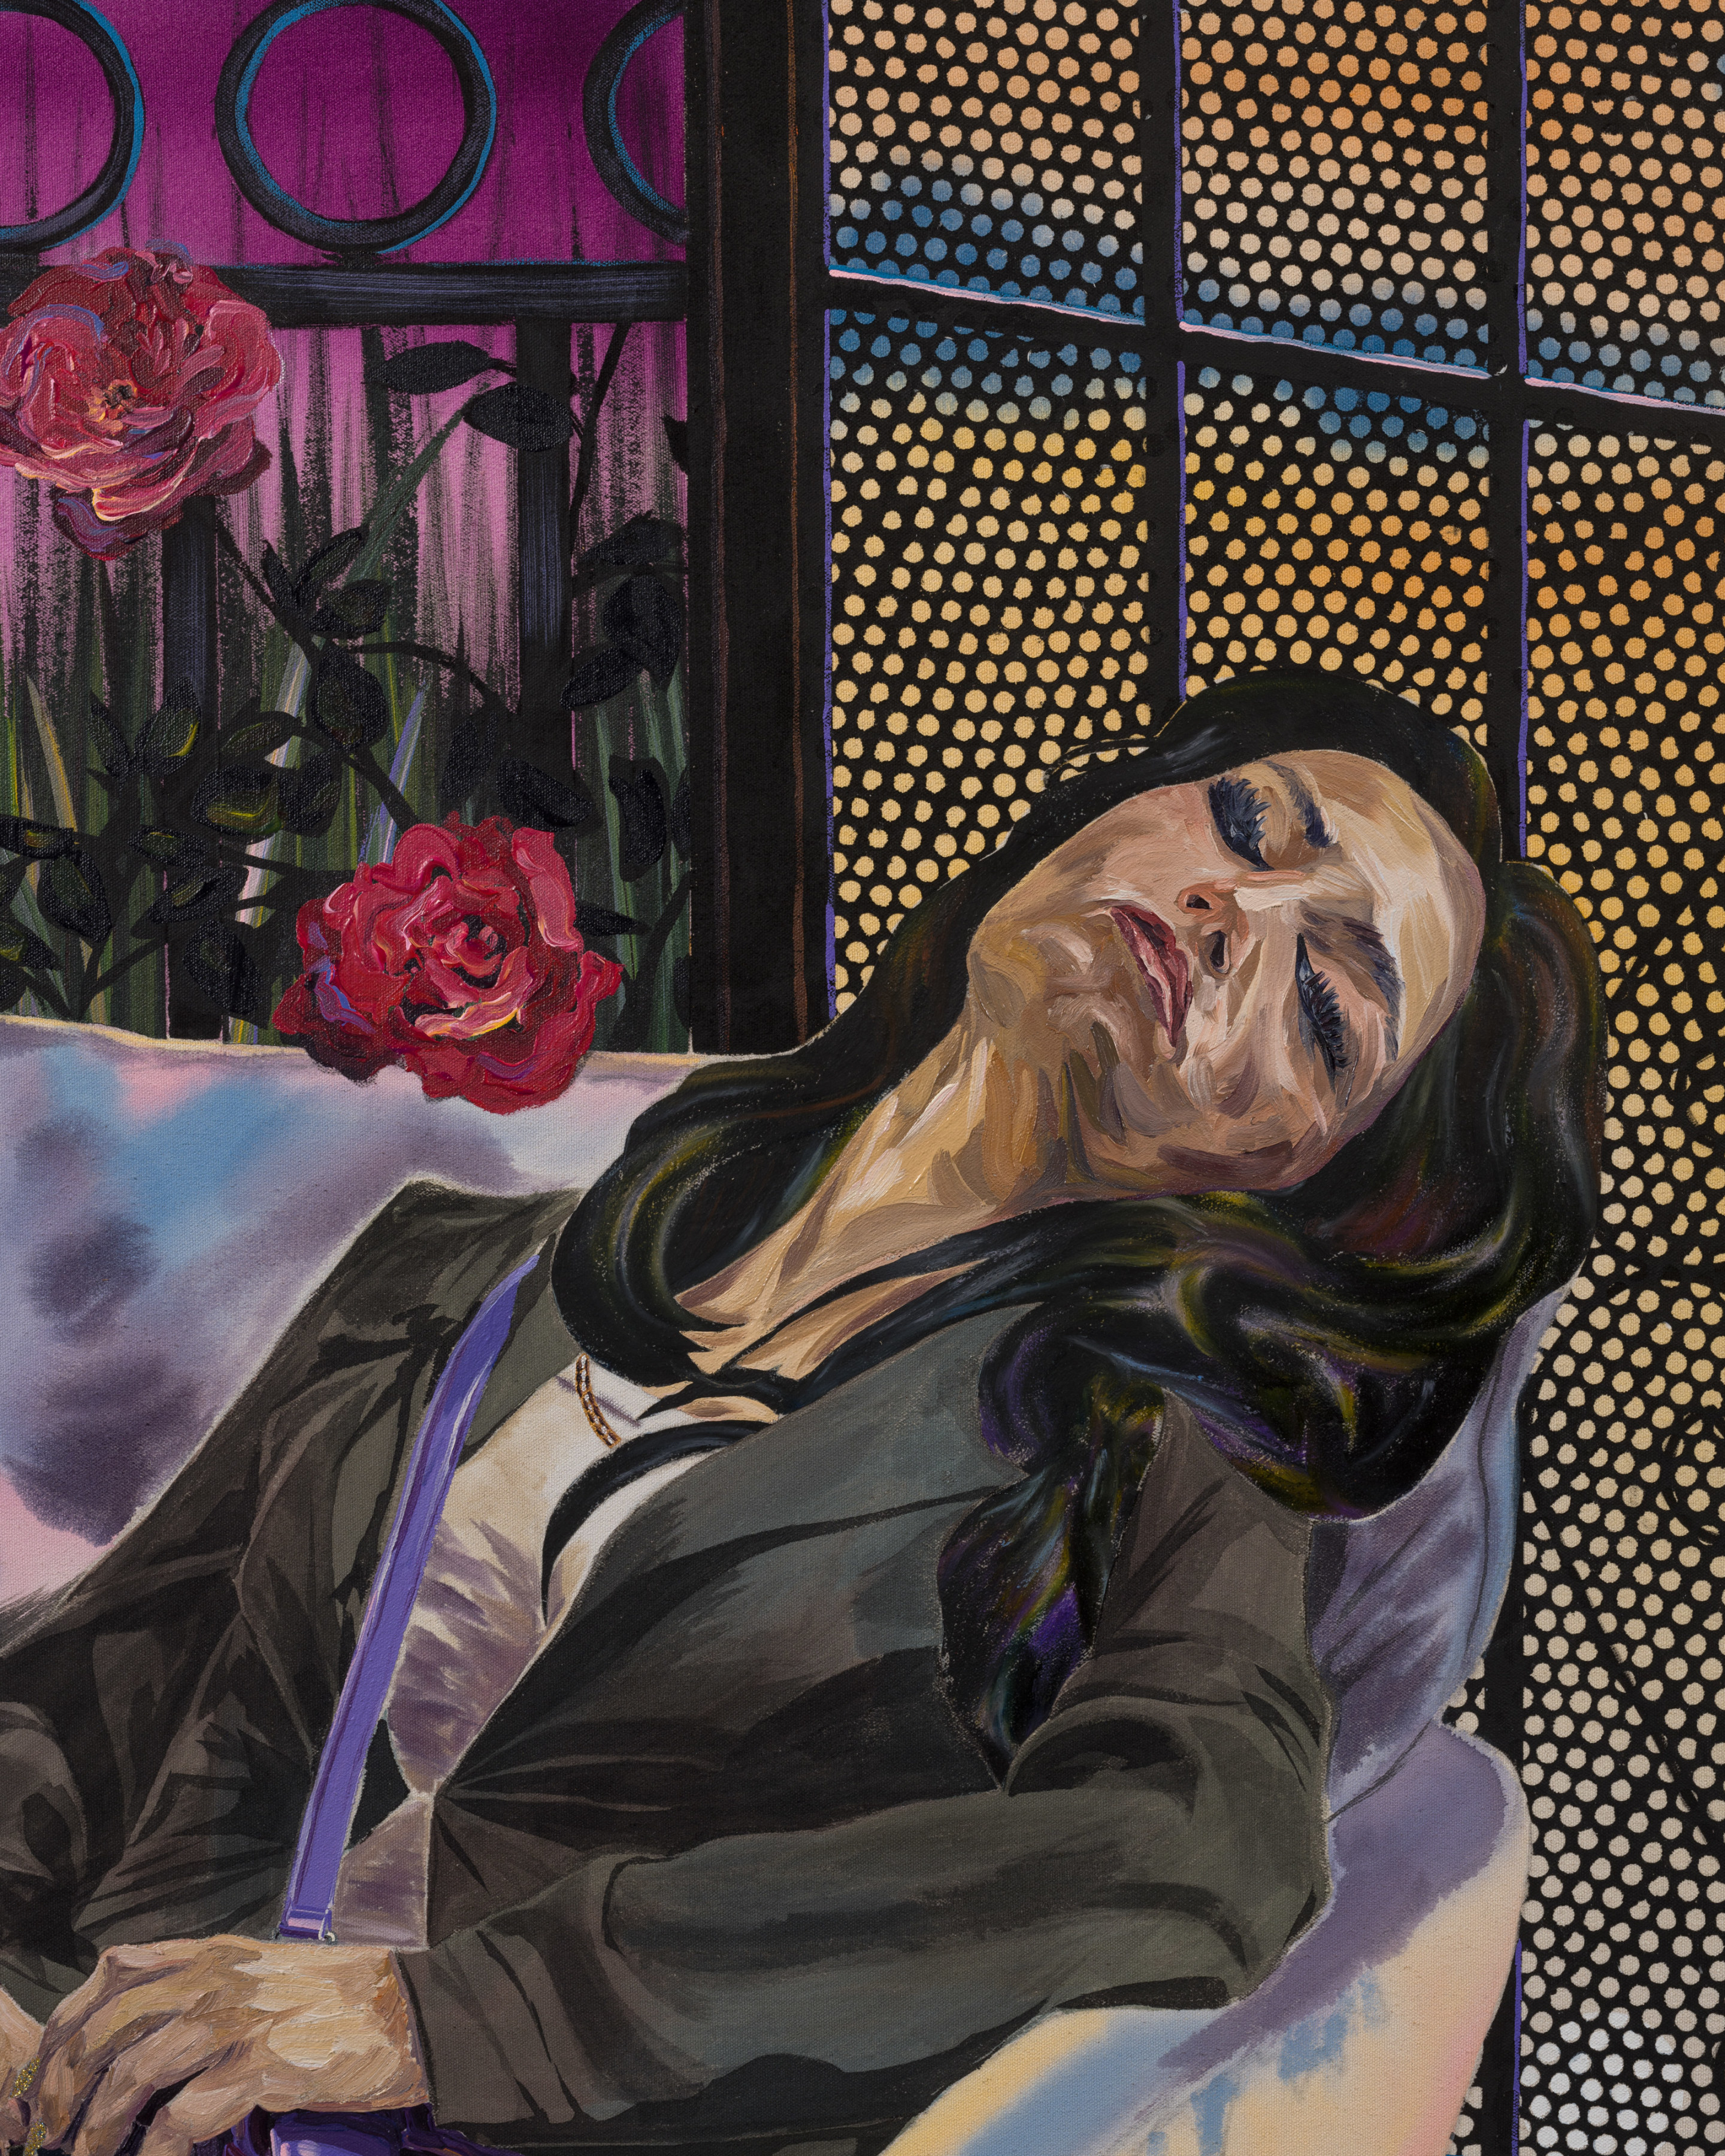 Detail of Tidawhitney Lek's "To Little Me (Ronnie)" depicting a woman asleep in a chair.